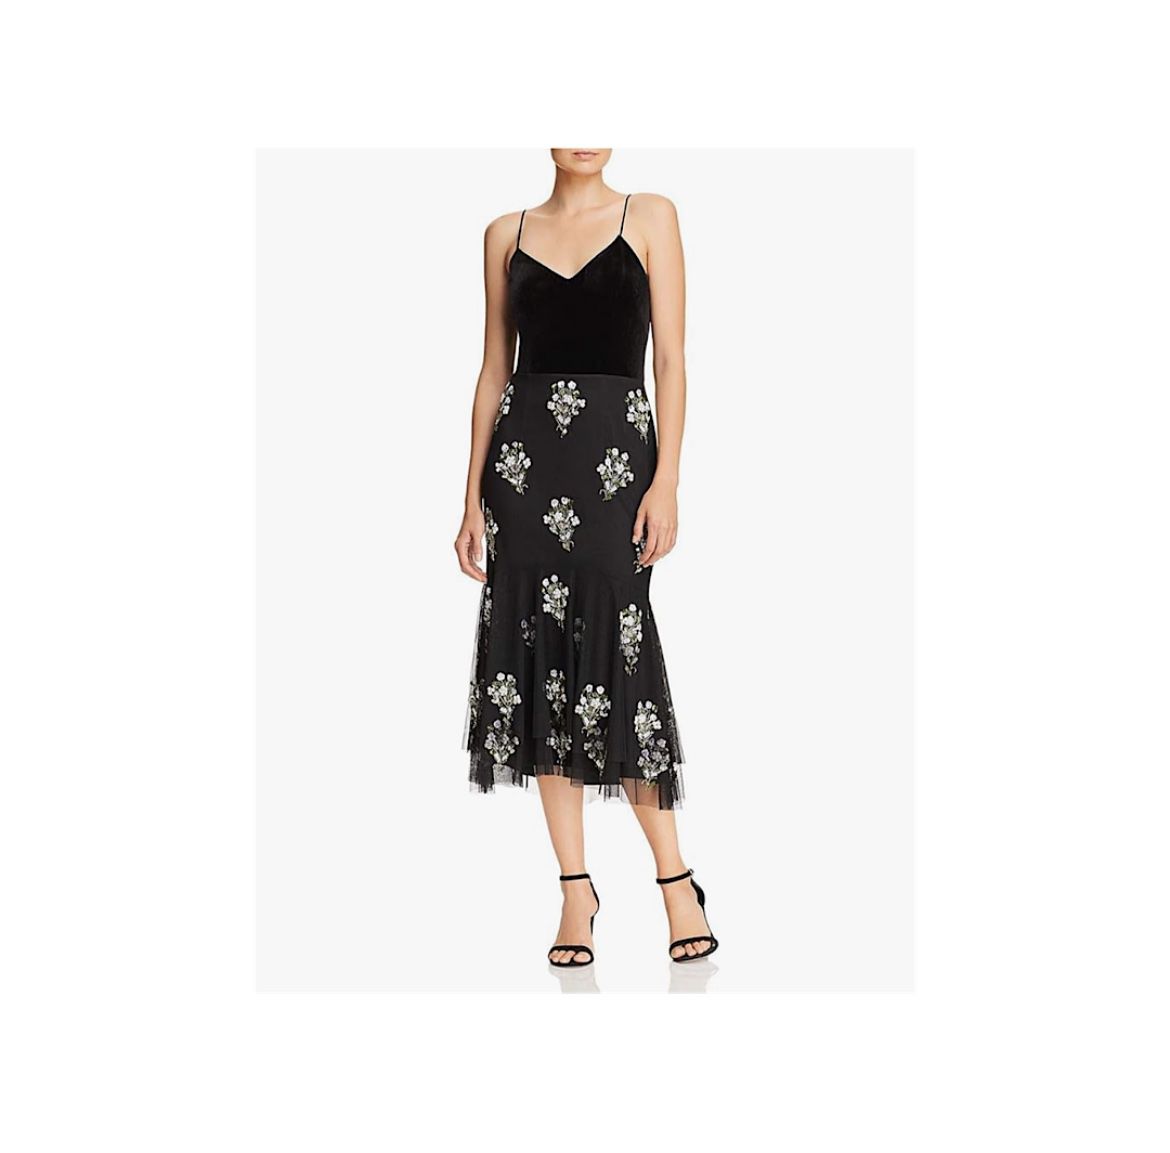 Adrianna Papell Beaded Cocktail Dress